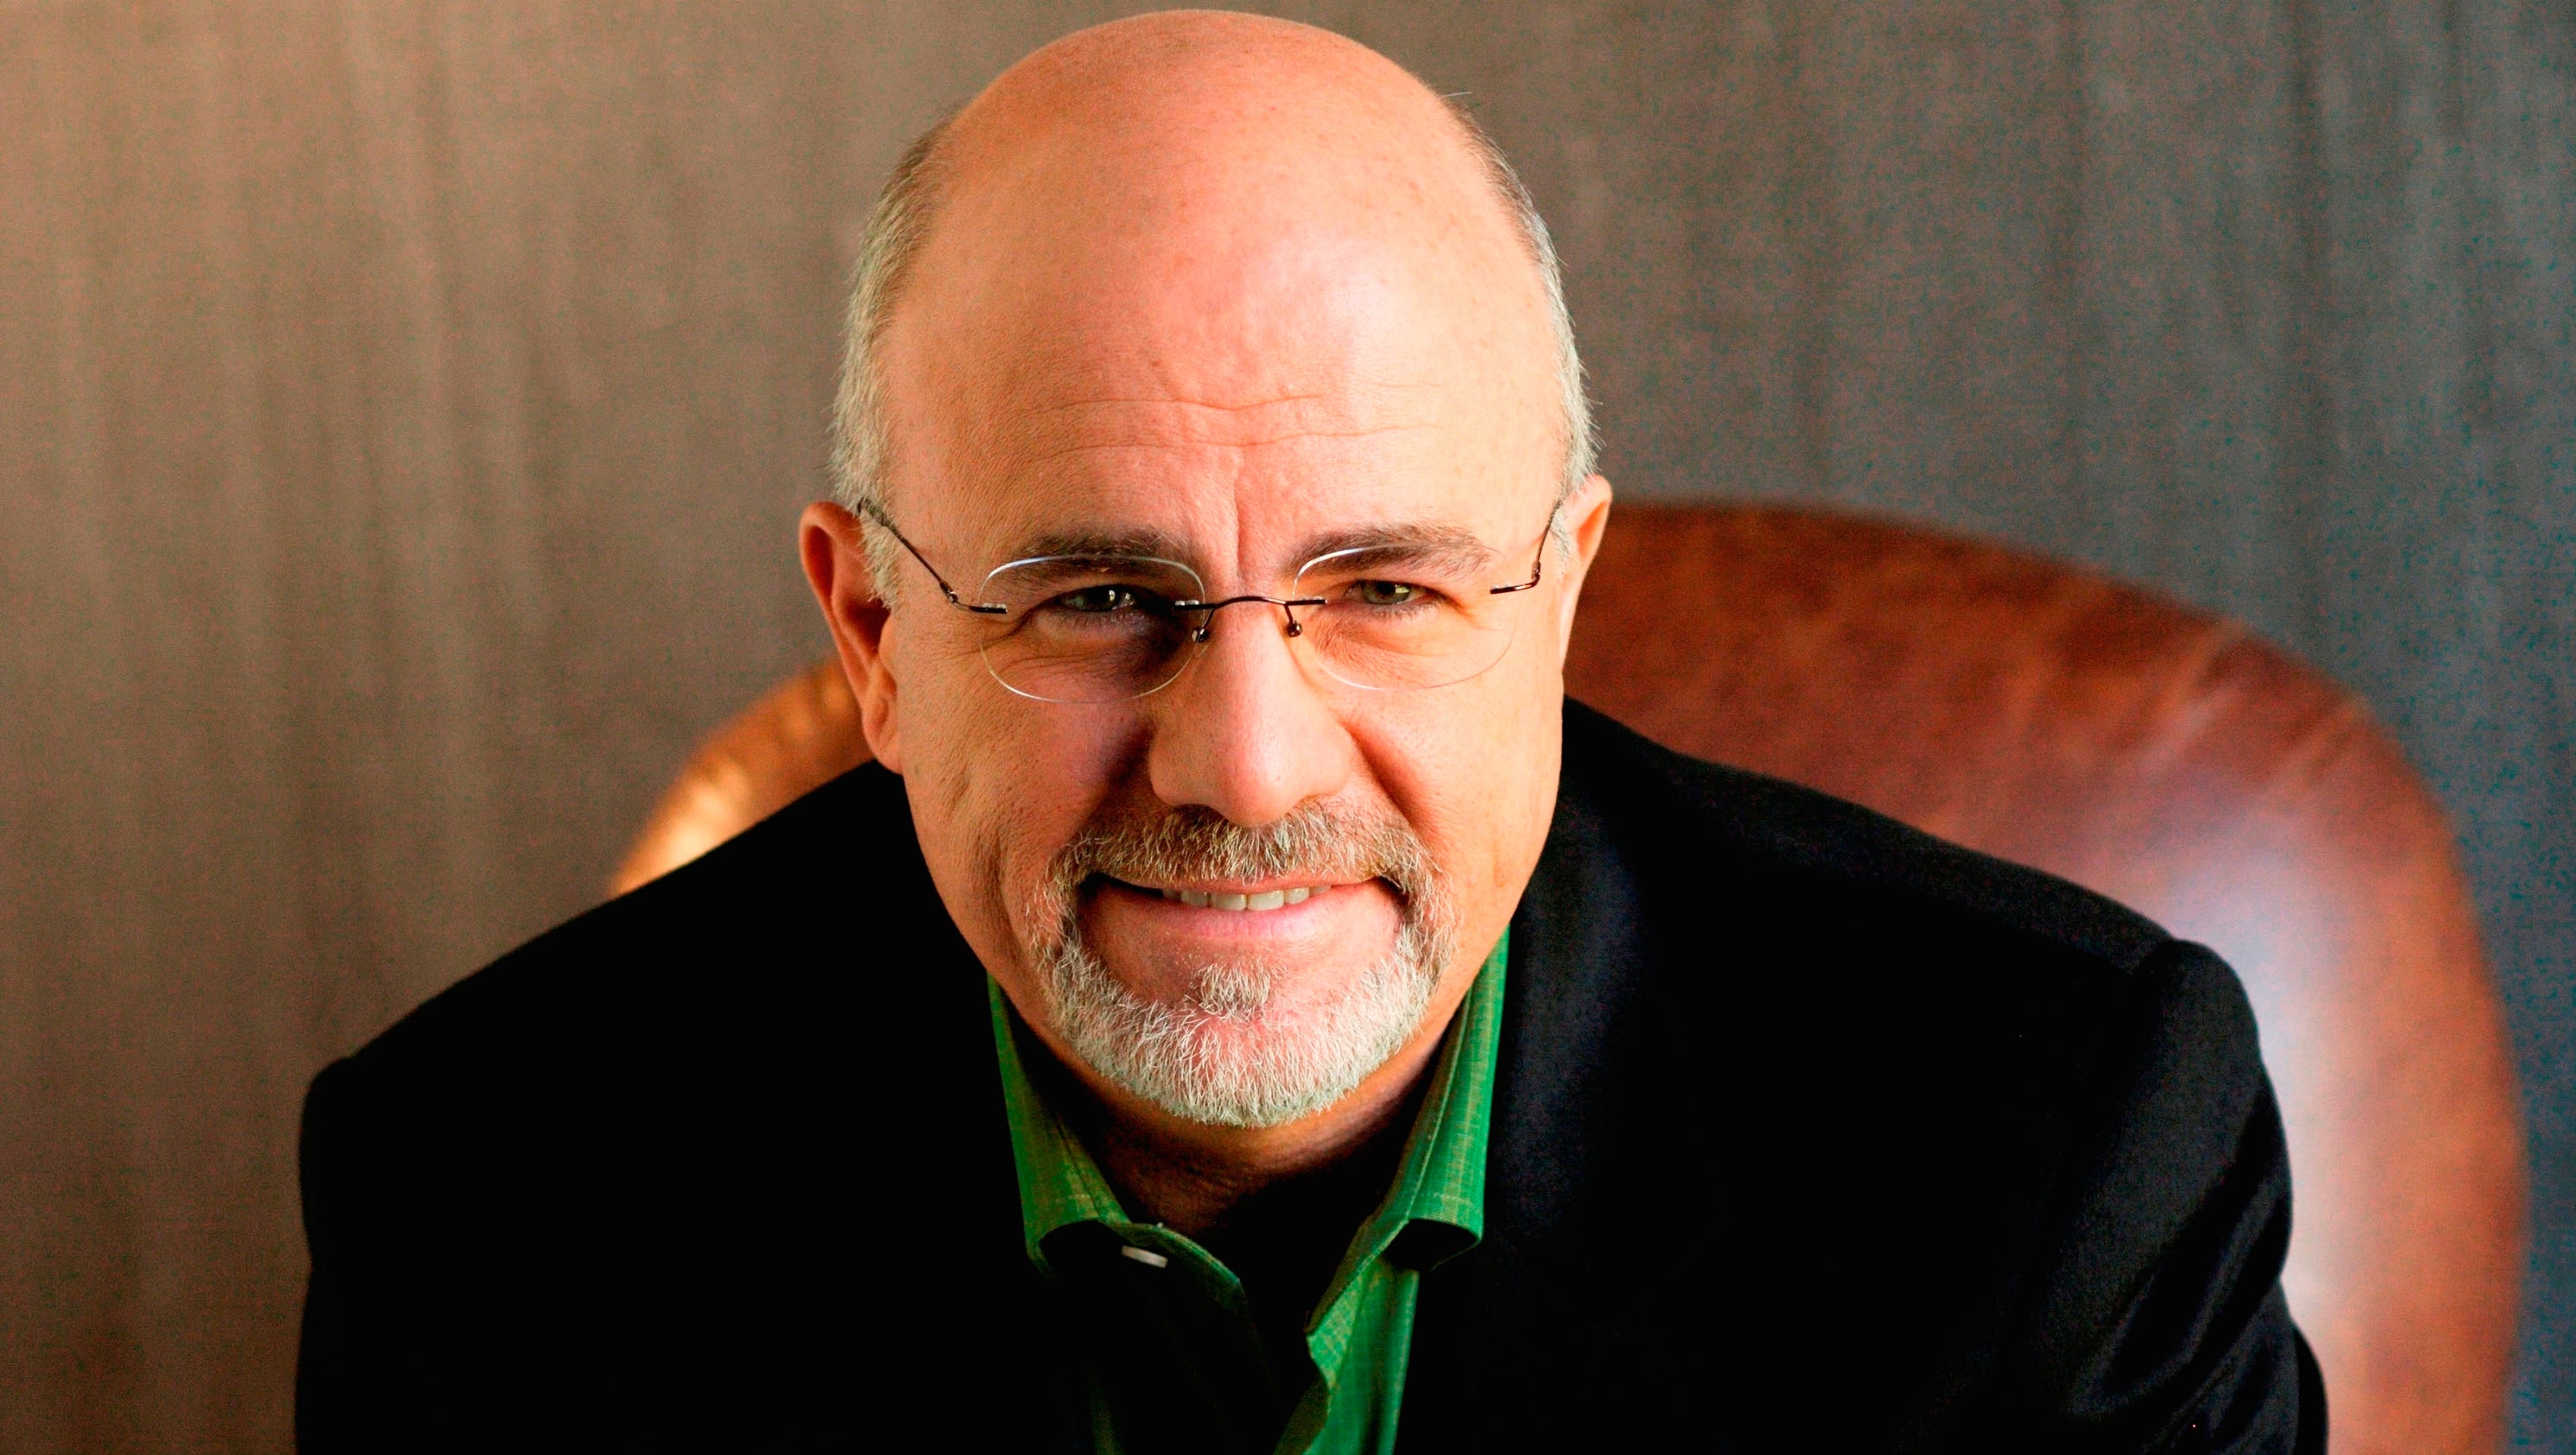 Dave Ramsey: Put money into Roth IRA rather than pension